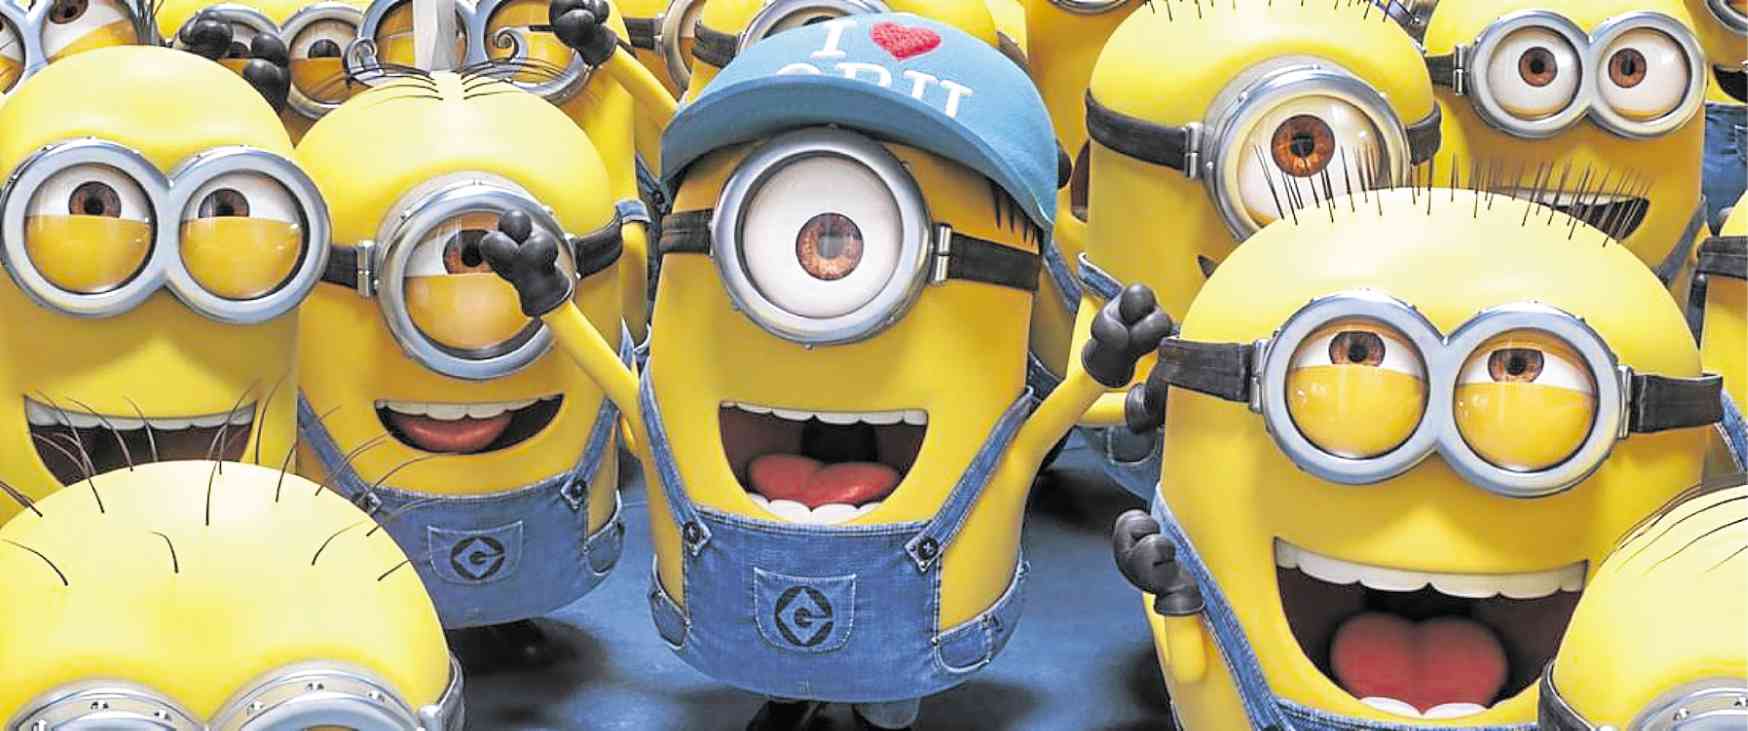 The weirdly lovable Minions